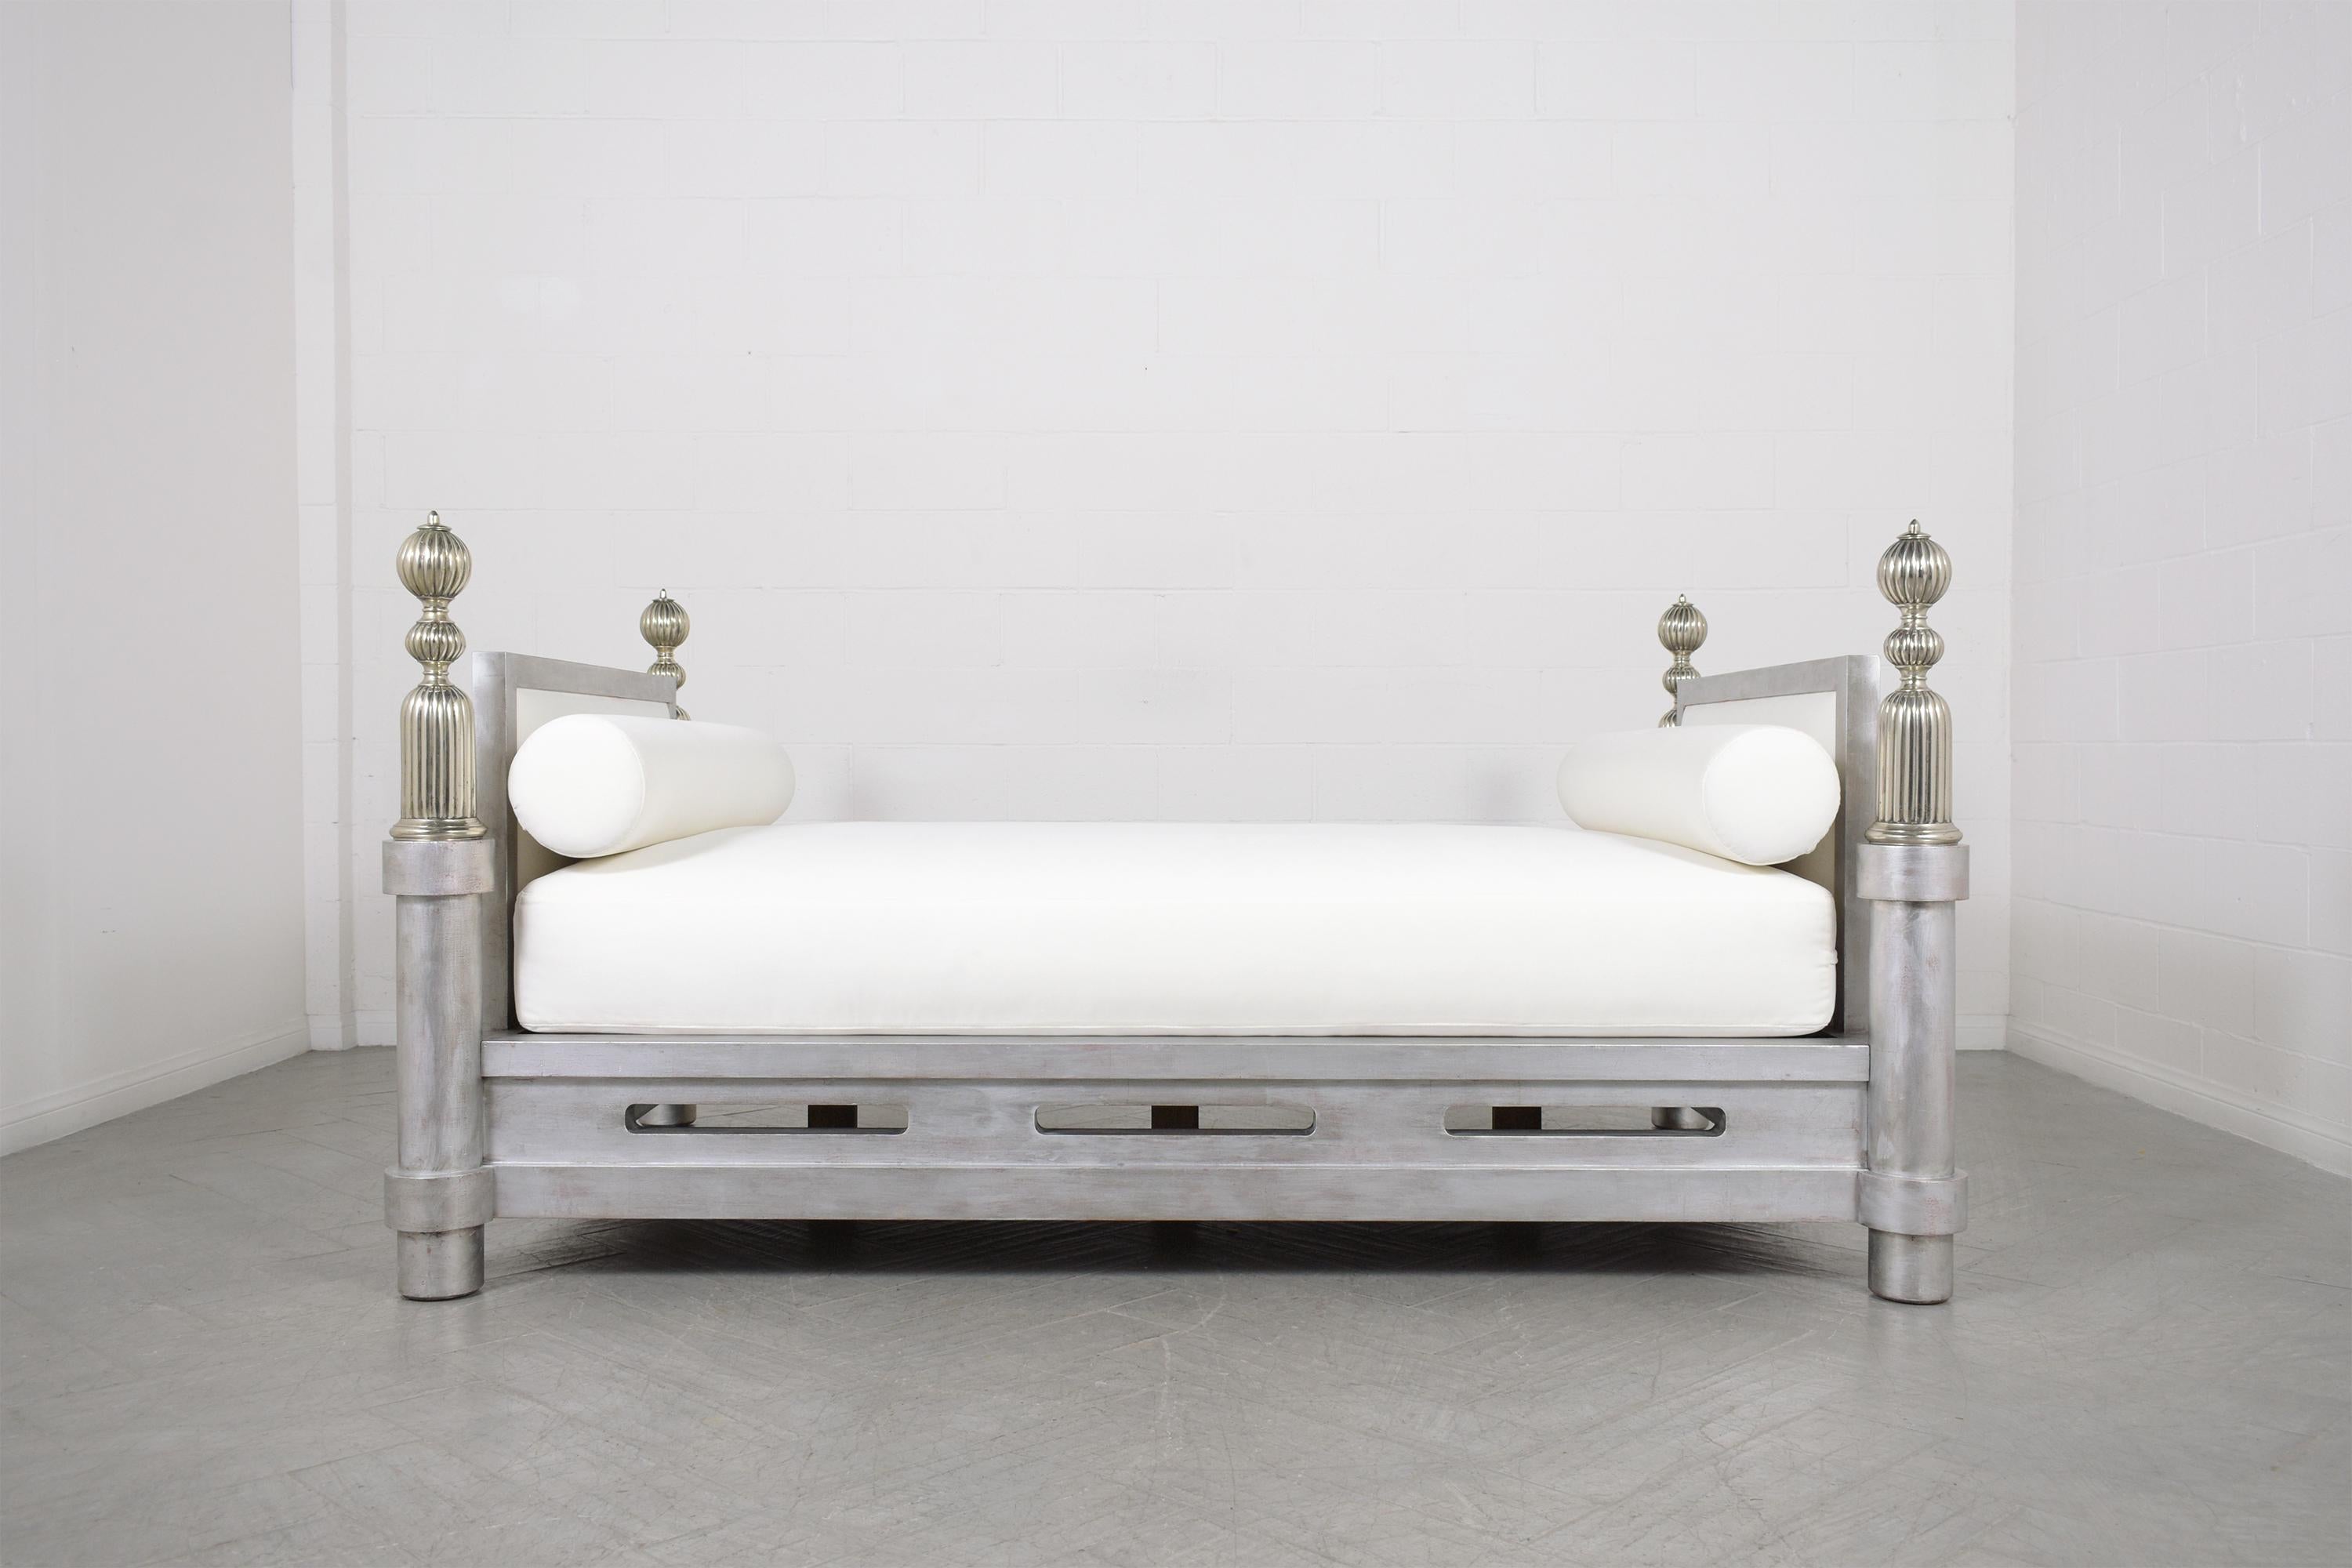 Italian Hand-Crafted Regency-Style Daybed: Vintage Elegance & Contemporary Aesthetics For Sale